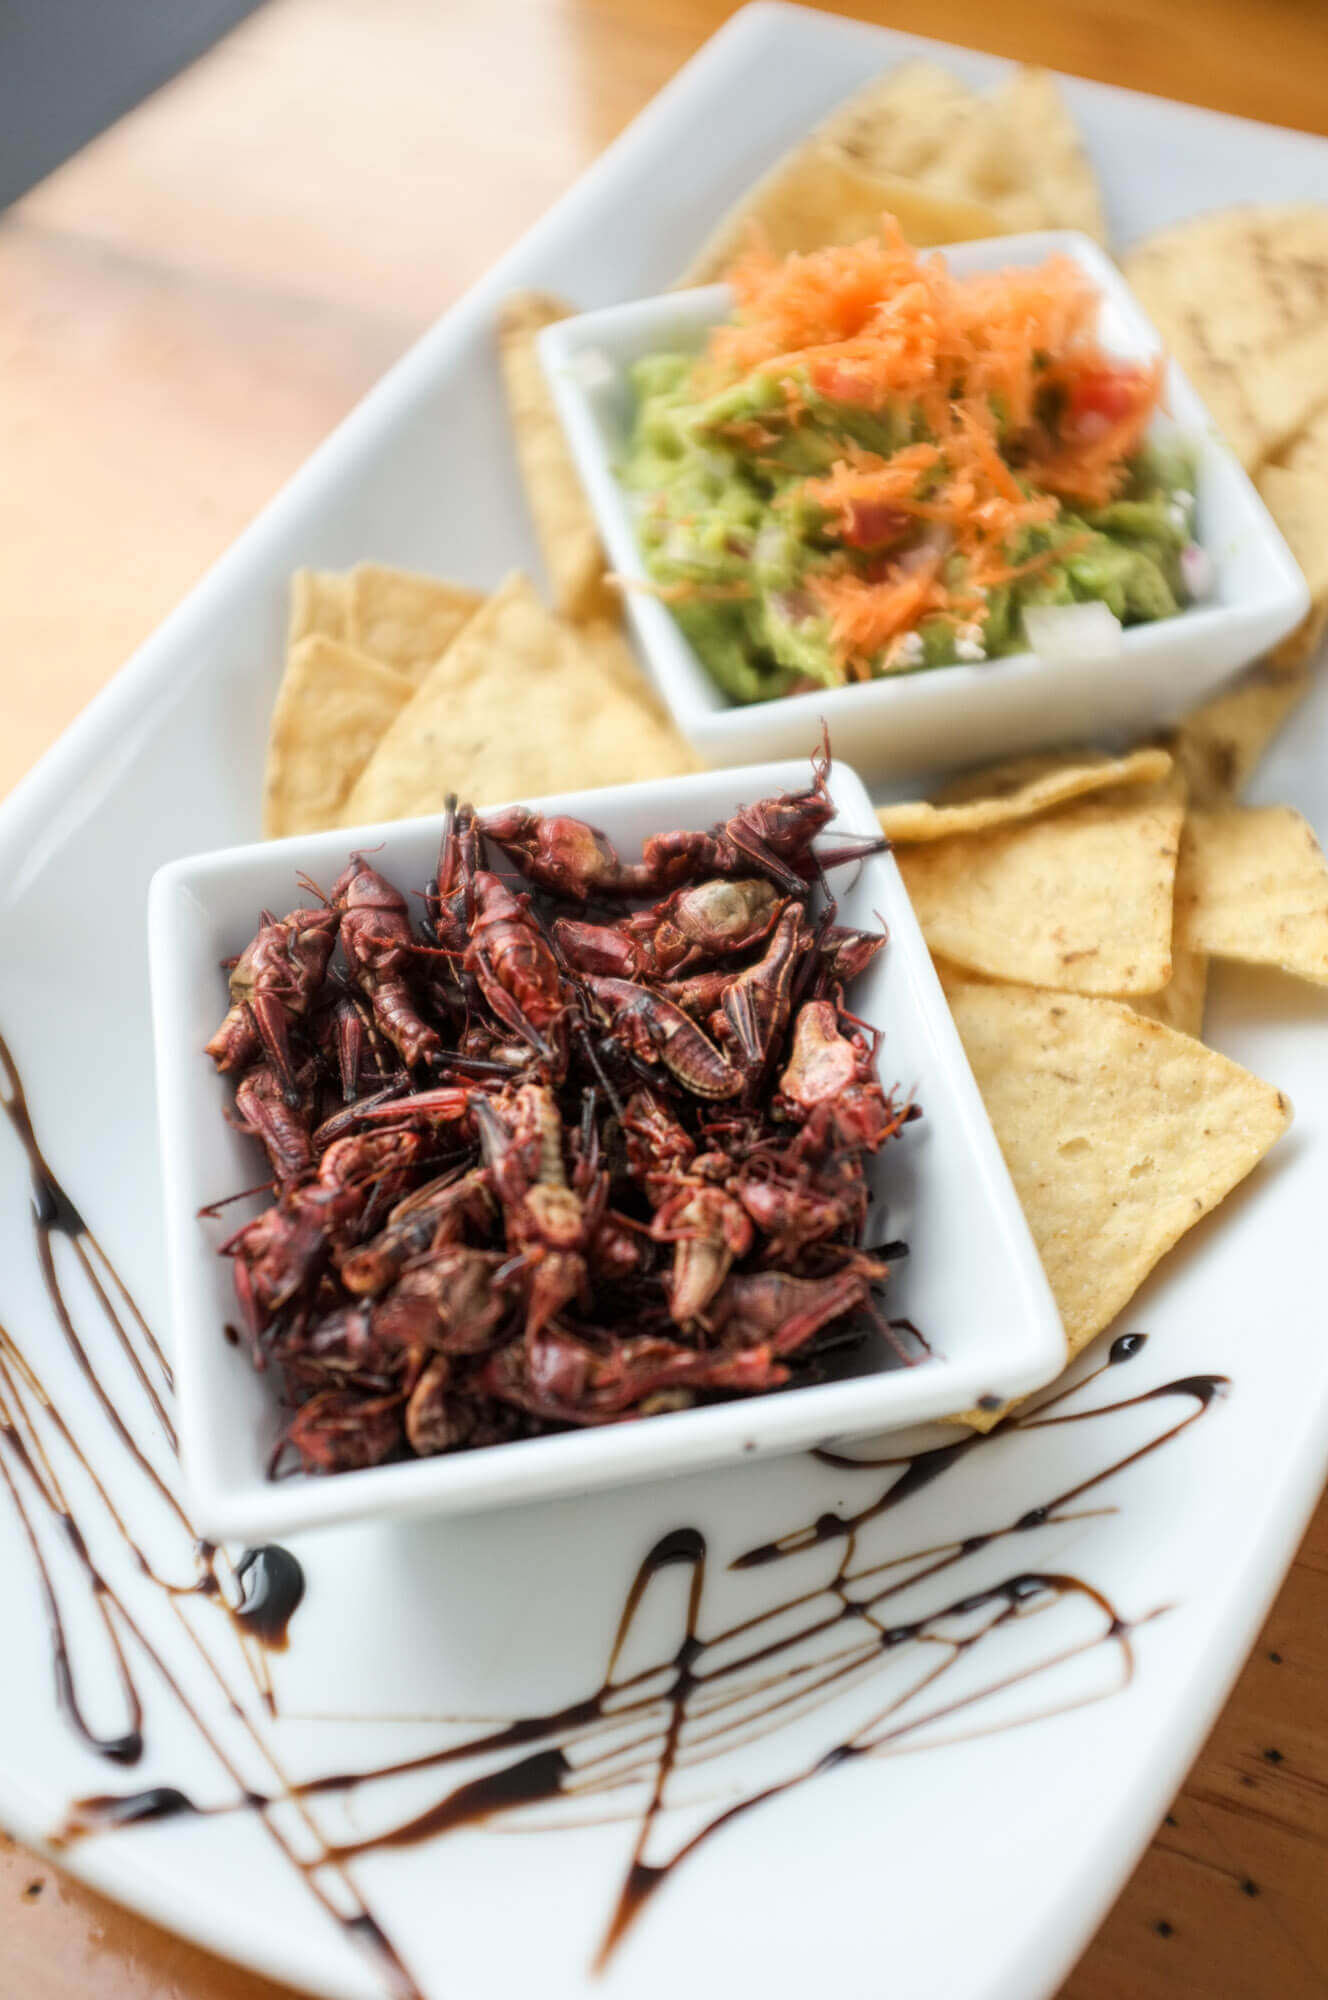 Chapulines (grasshoppers) with guacamole and tortilla chips at Bar El Mexicano in Mexico City